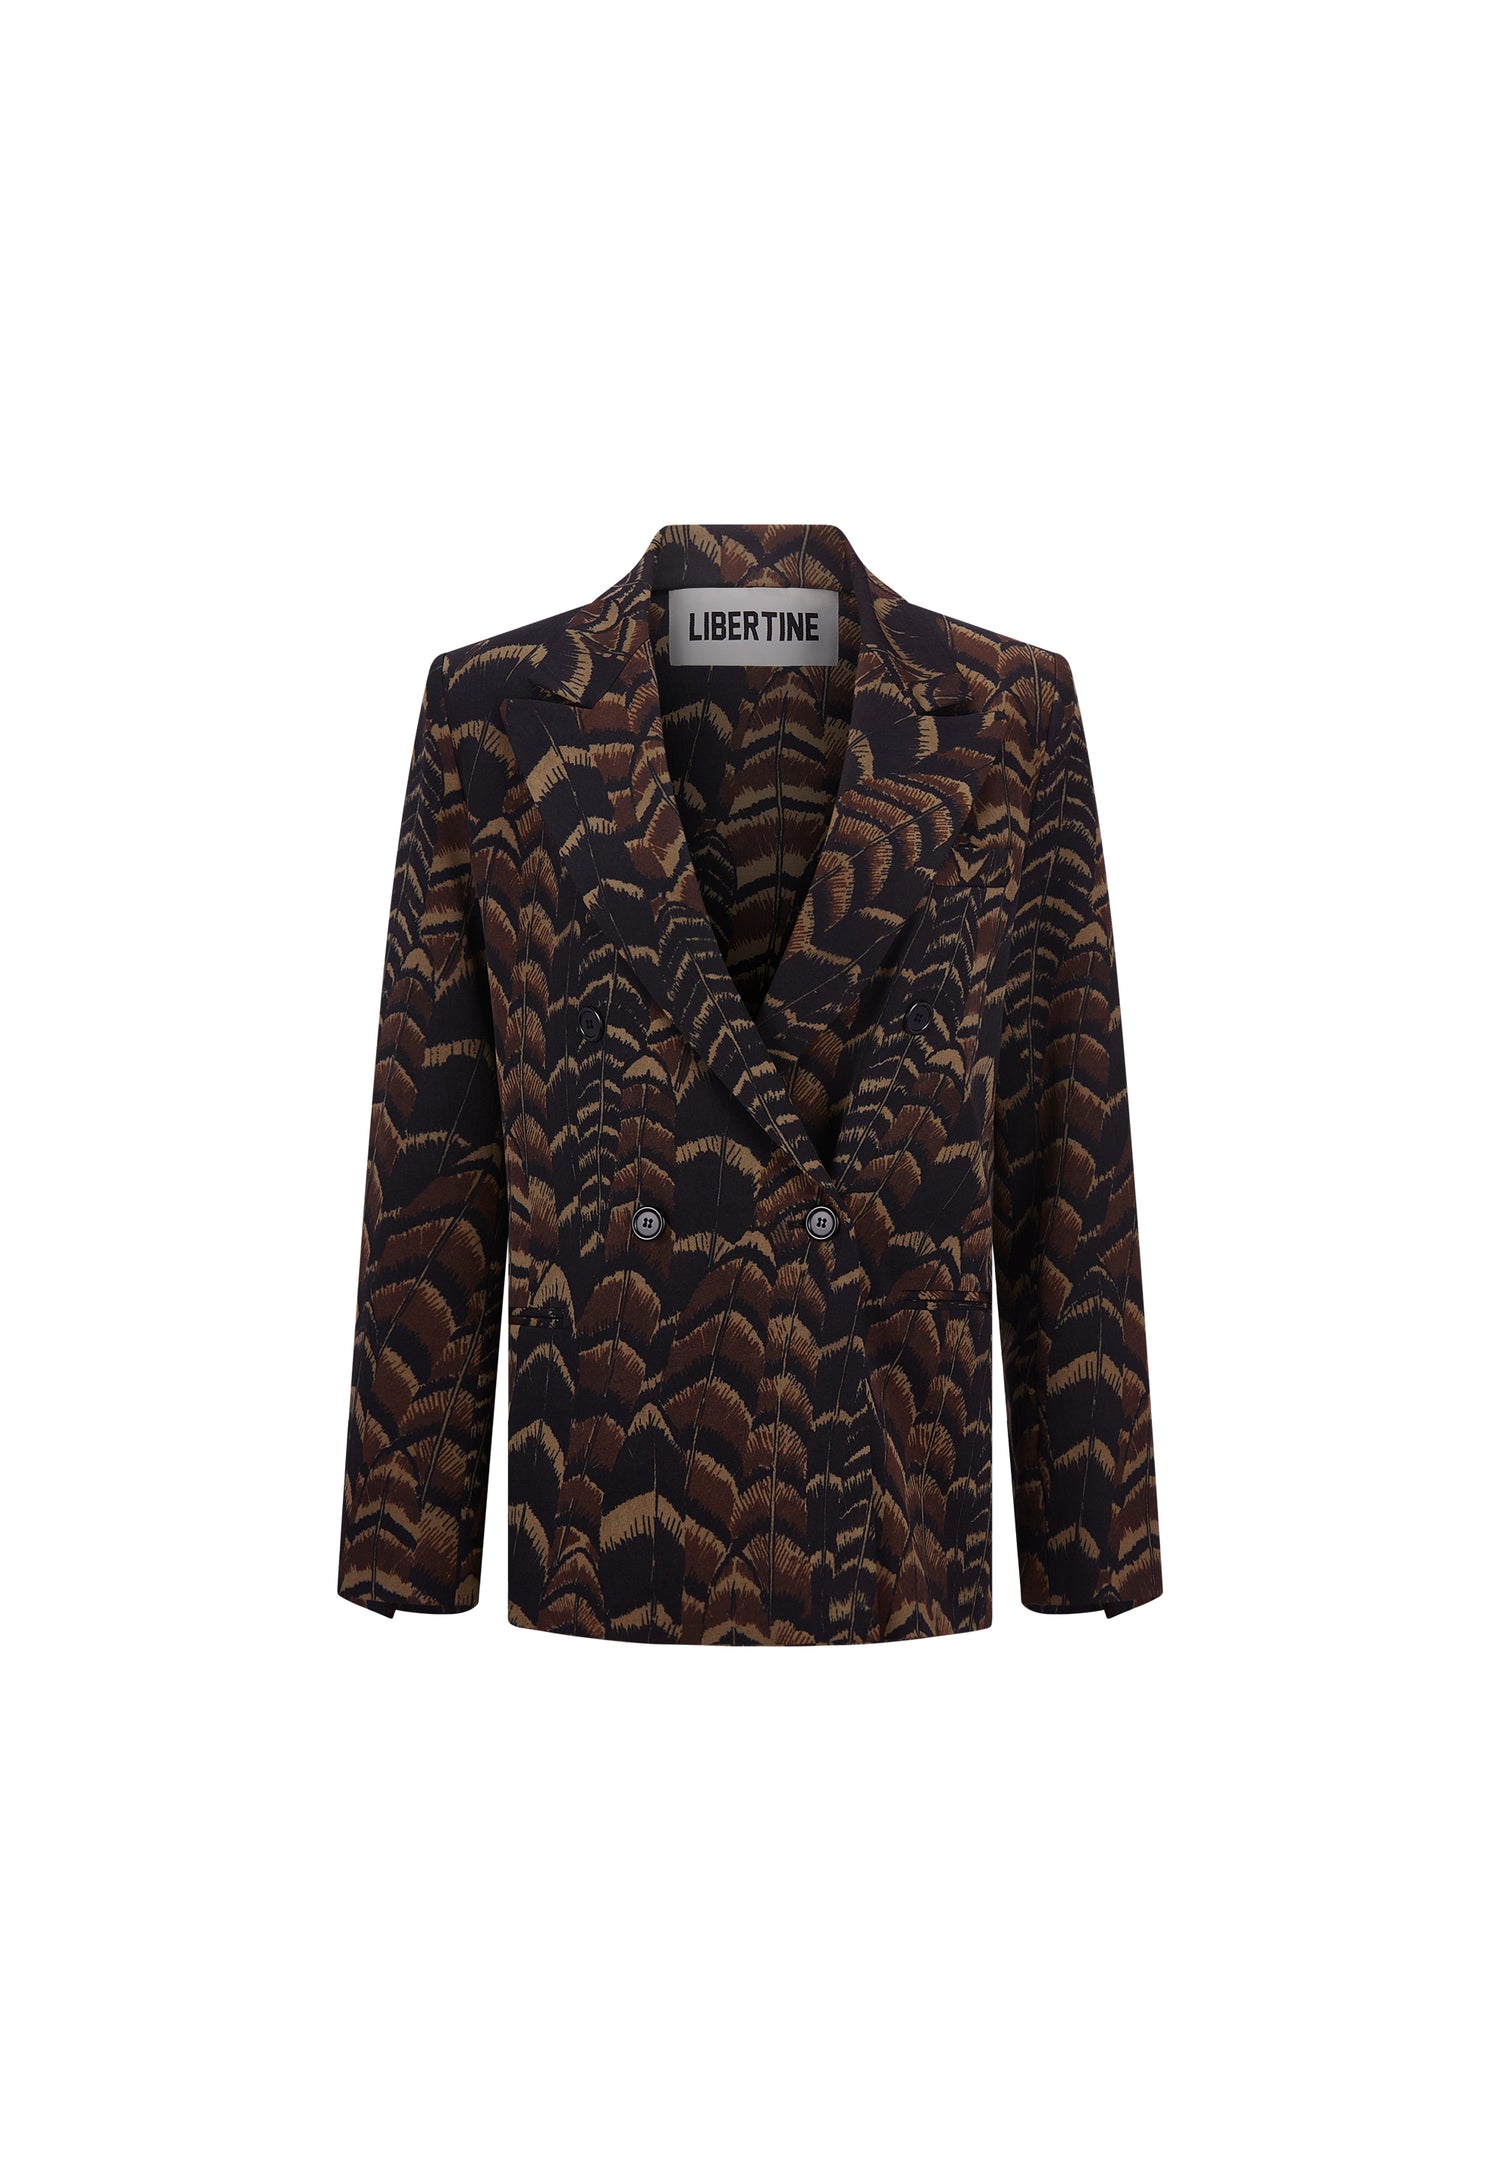 'FEATHERS' DOUBLE BREASTED JACKET -  - Libertine